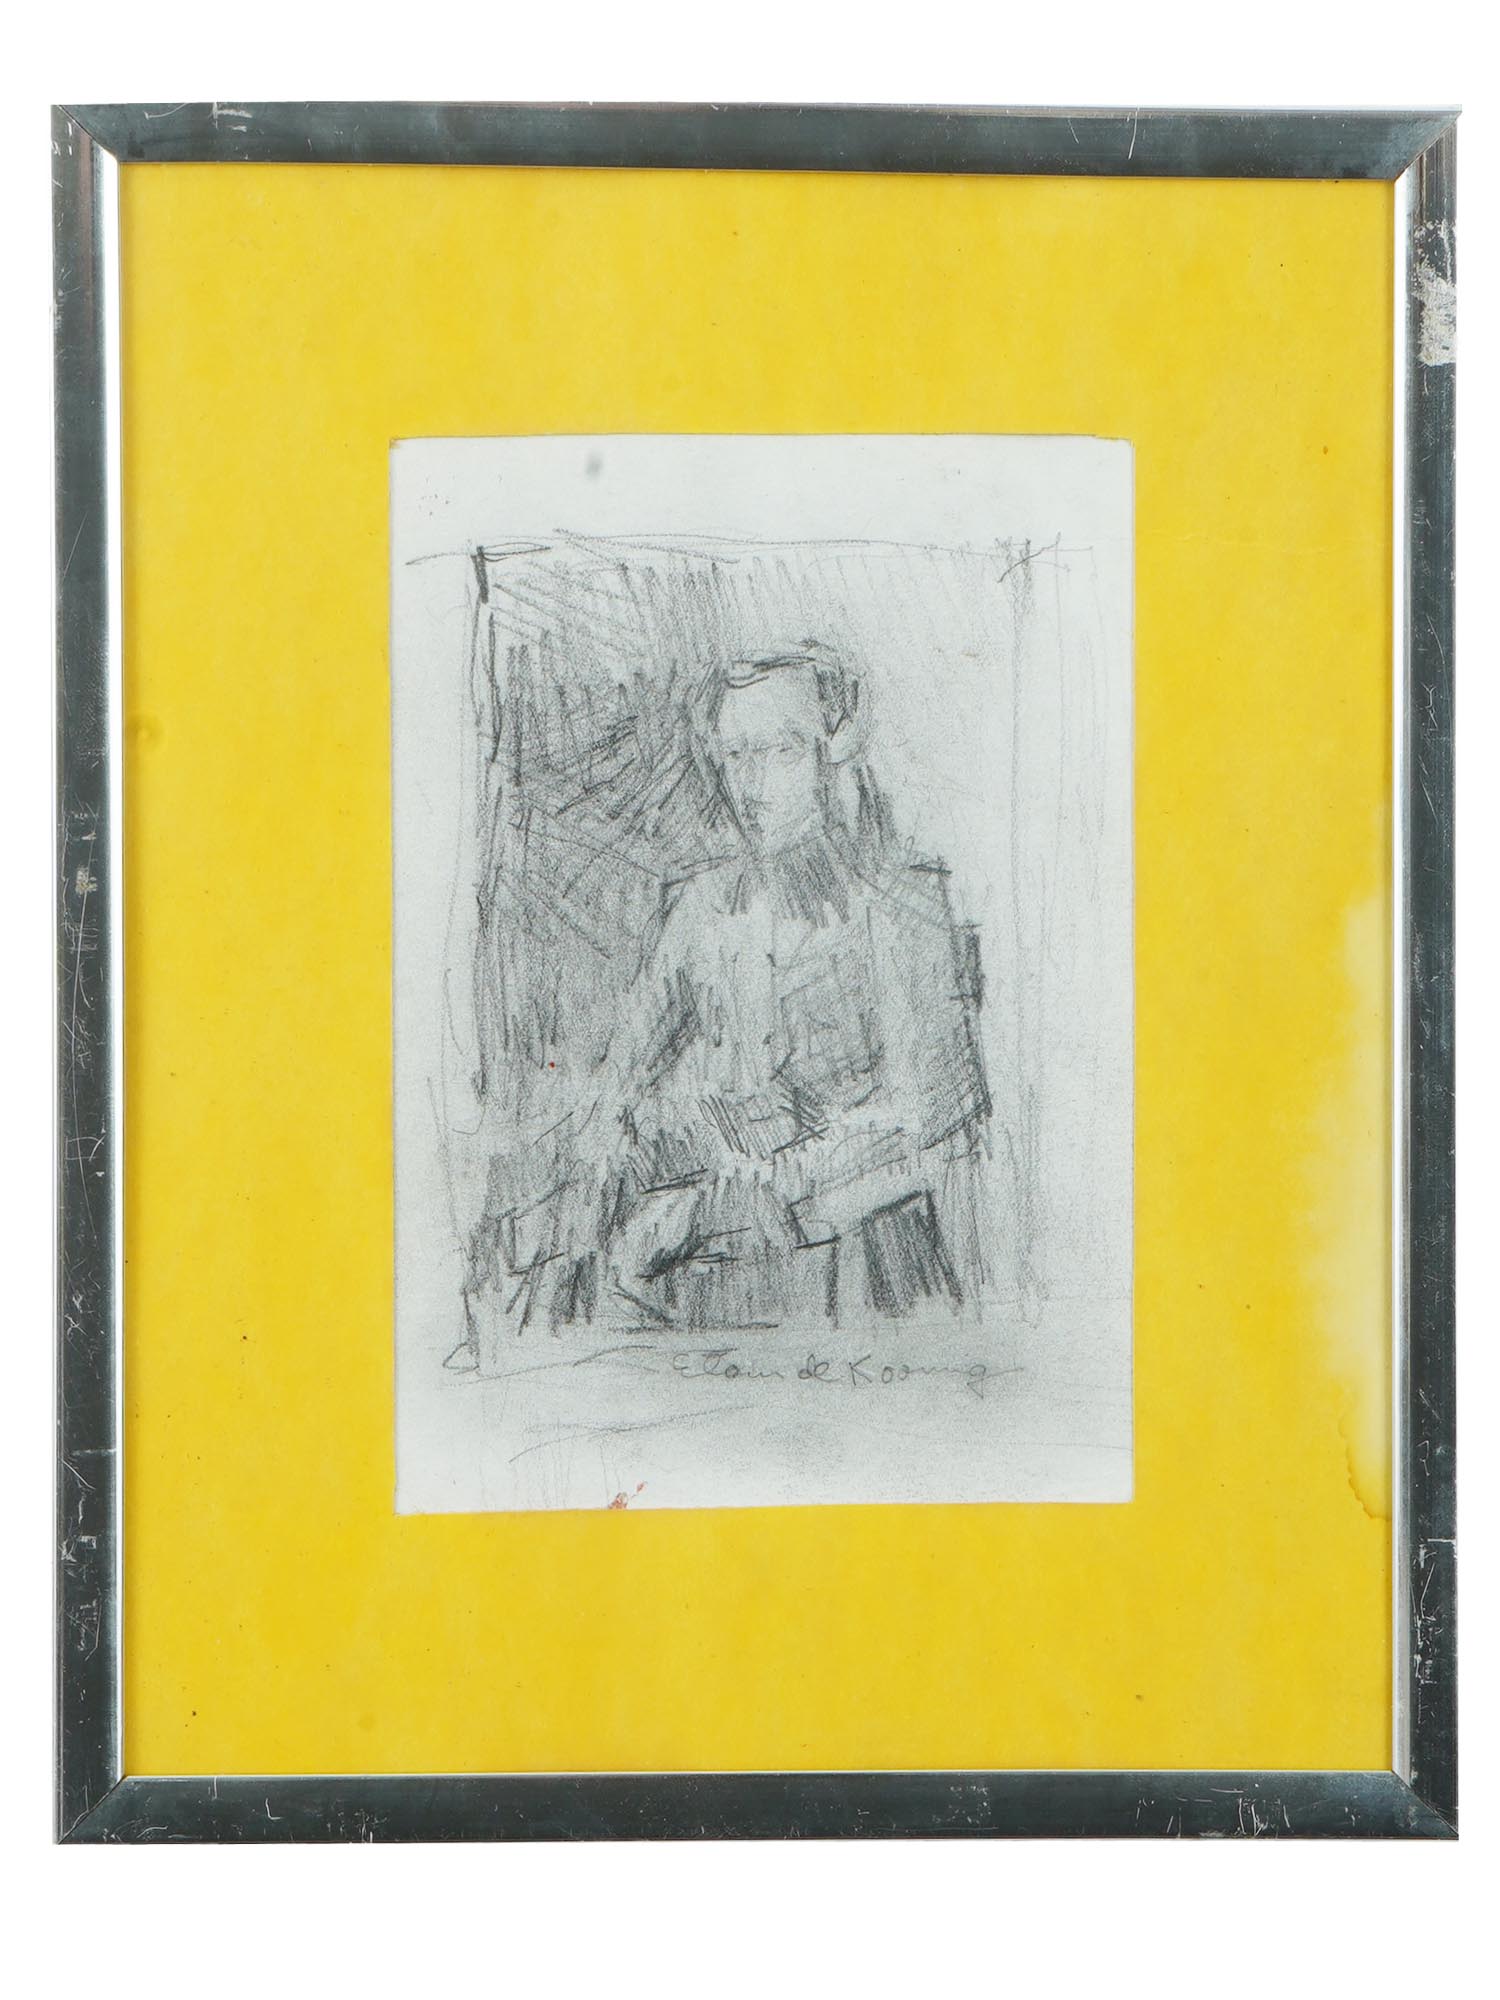 1979 AMERICAN PENCIL DRAWING BY ELAINE DE KOONING PIC-0